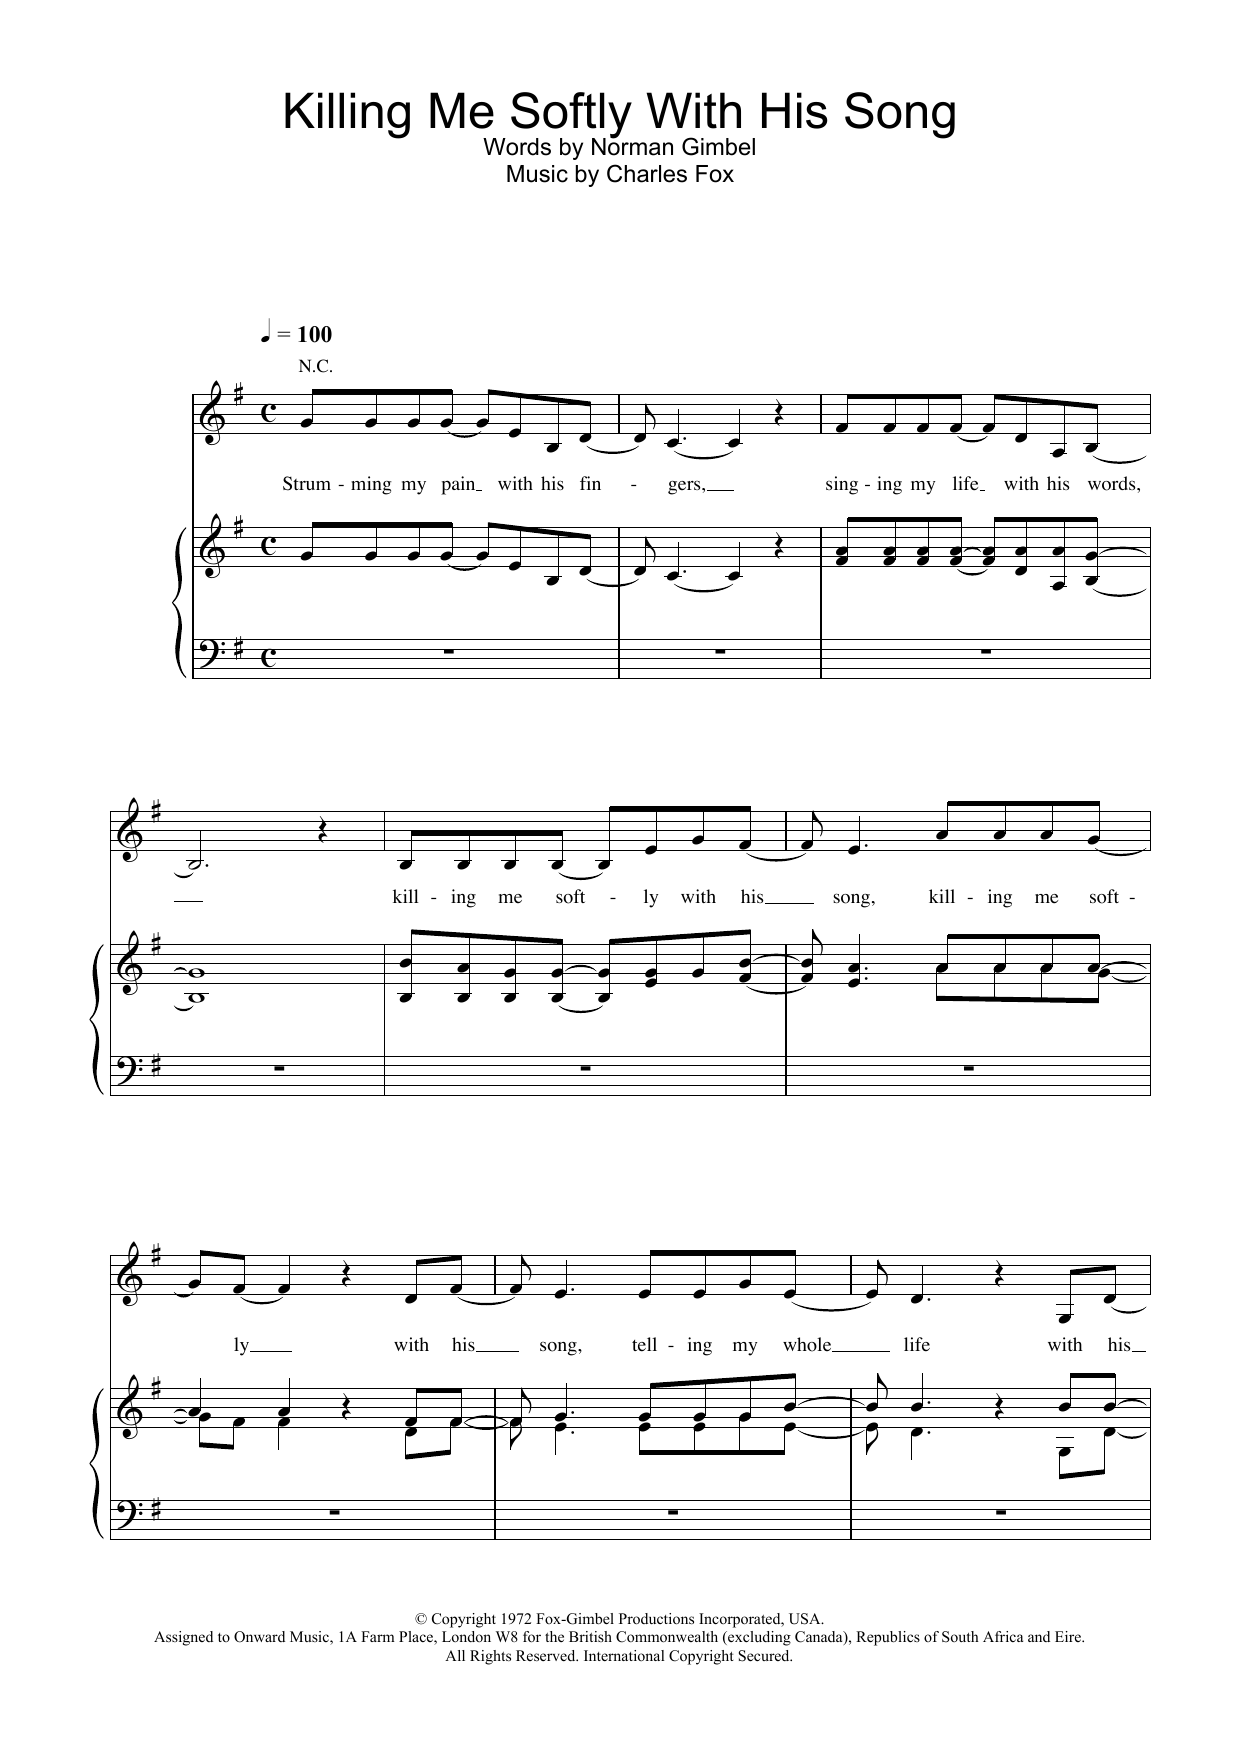 Download Fugees Killing Me Softly With His Song Sheet Music